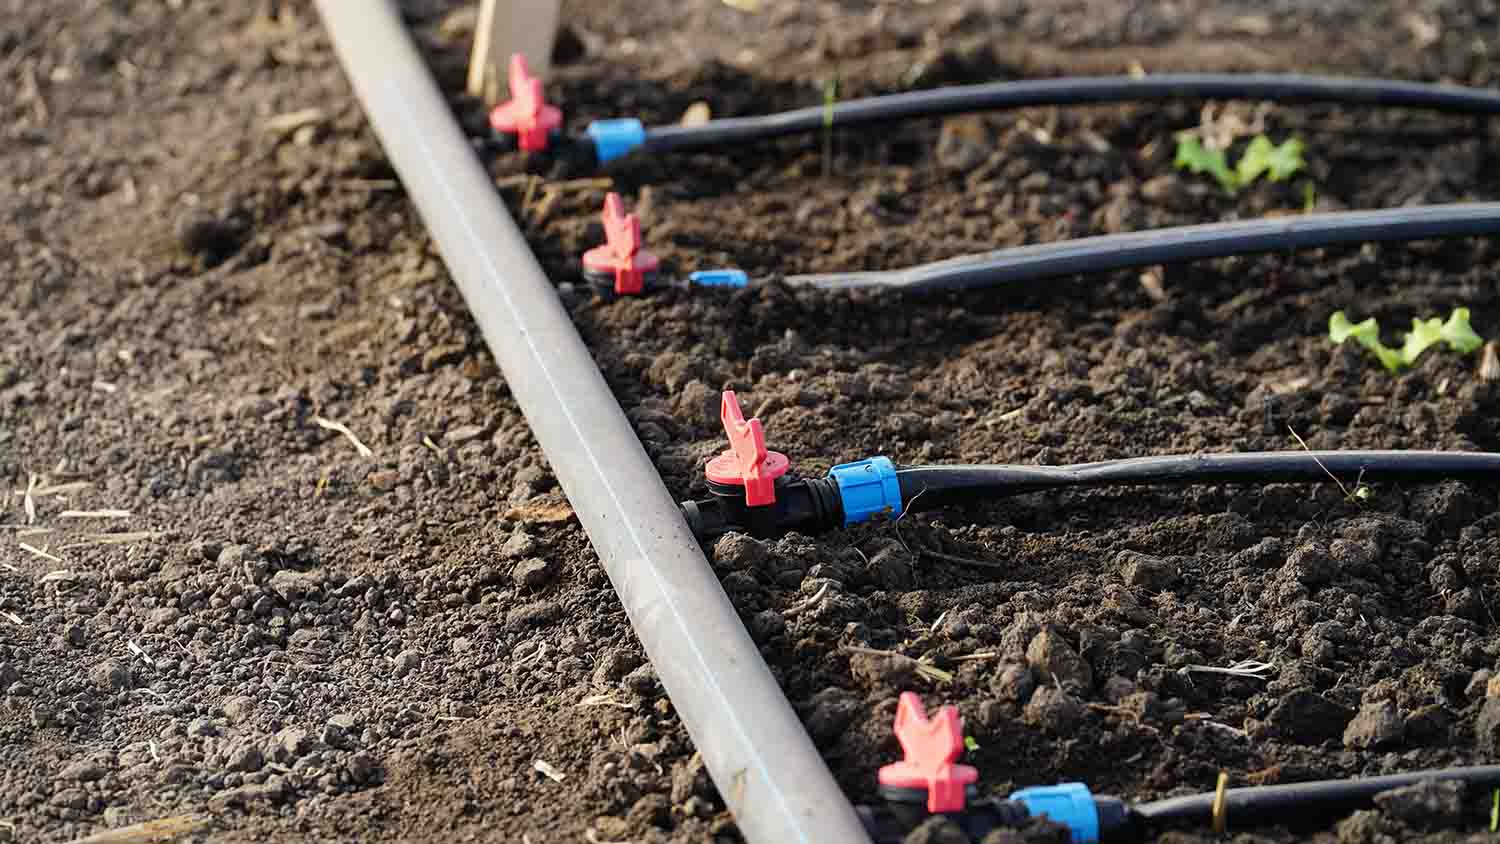 Services of Drip irrigation